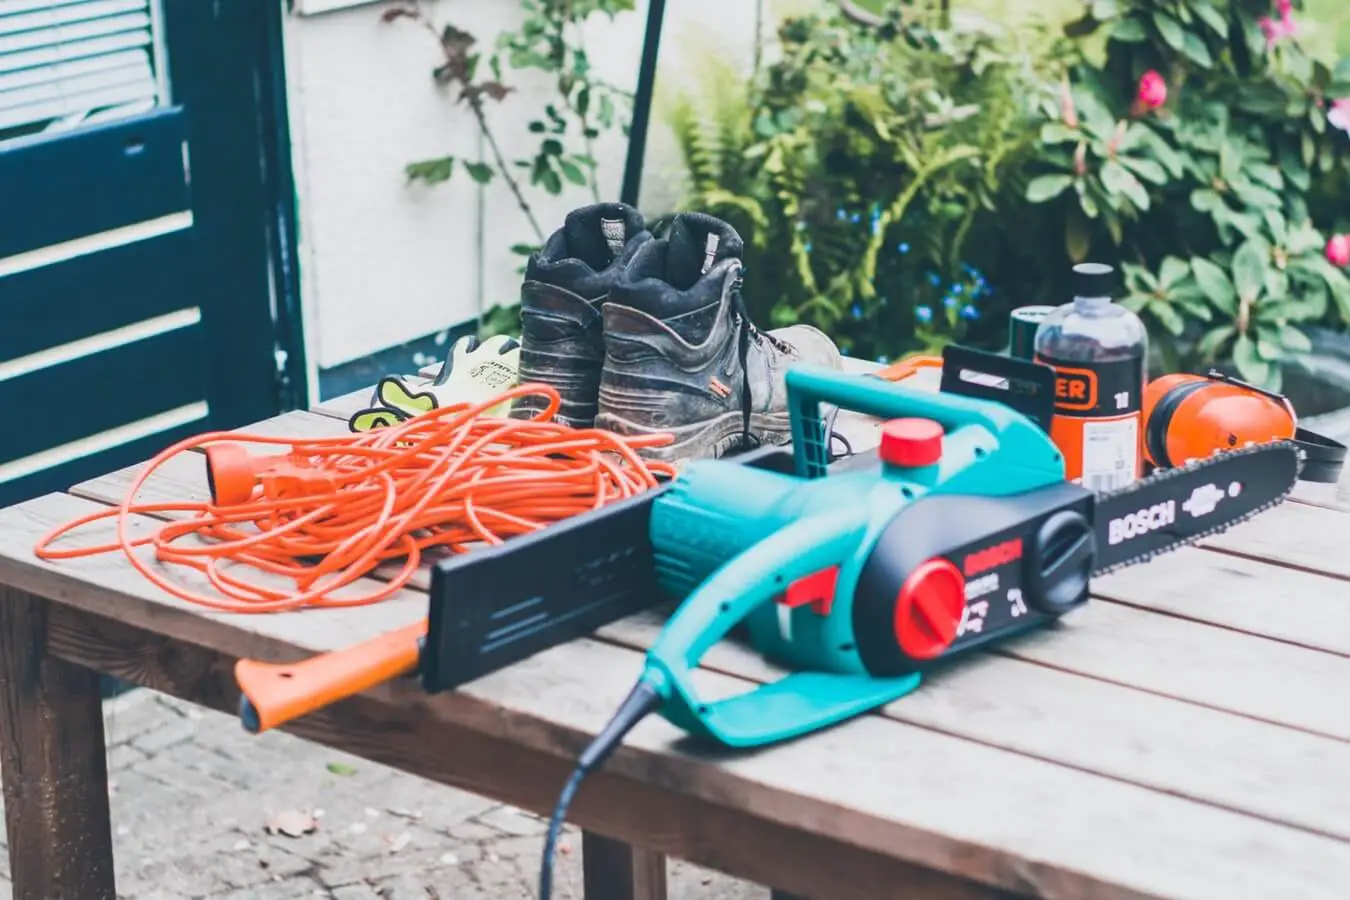 the best outdoor extension cord will help your workflow
